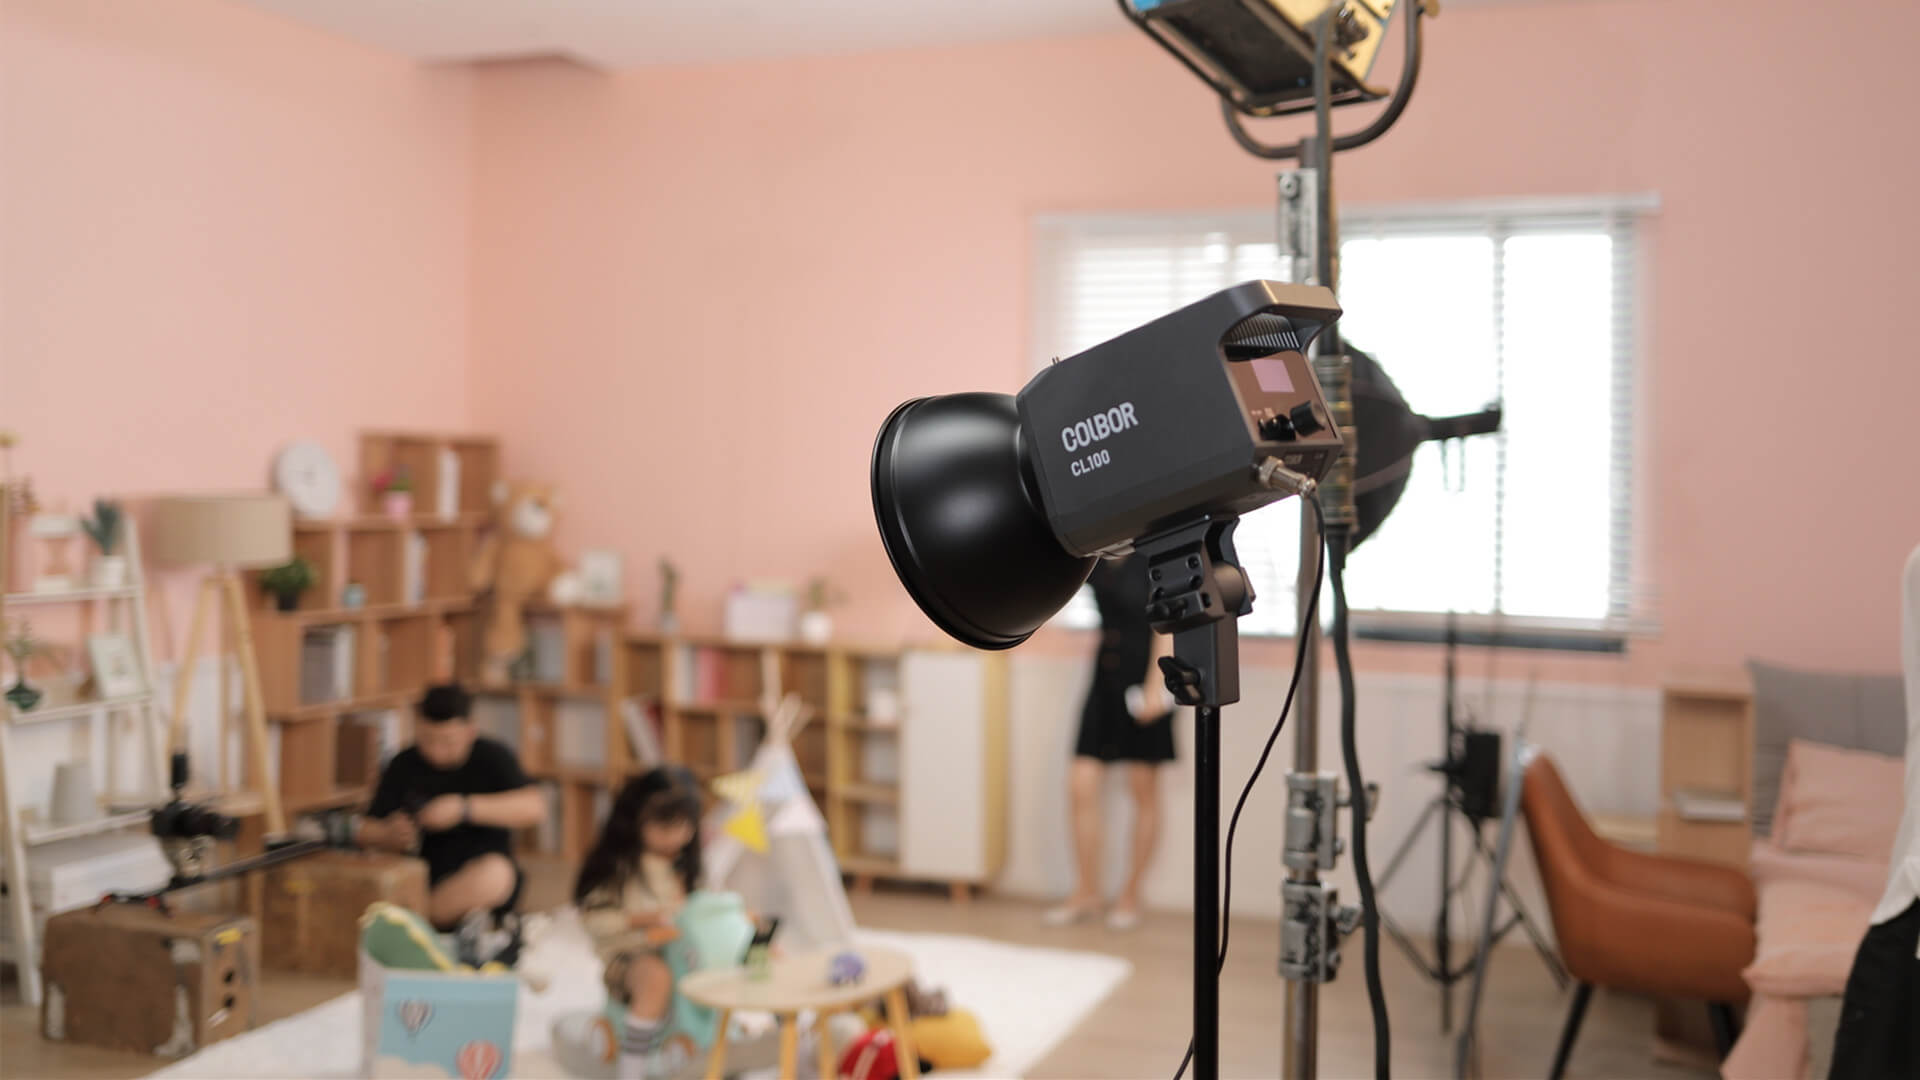 What makes the best continuous led lighting for video?